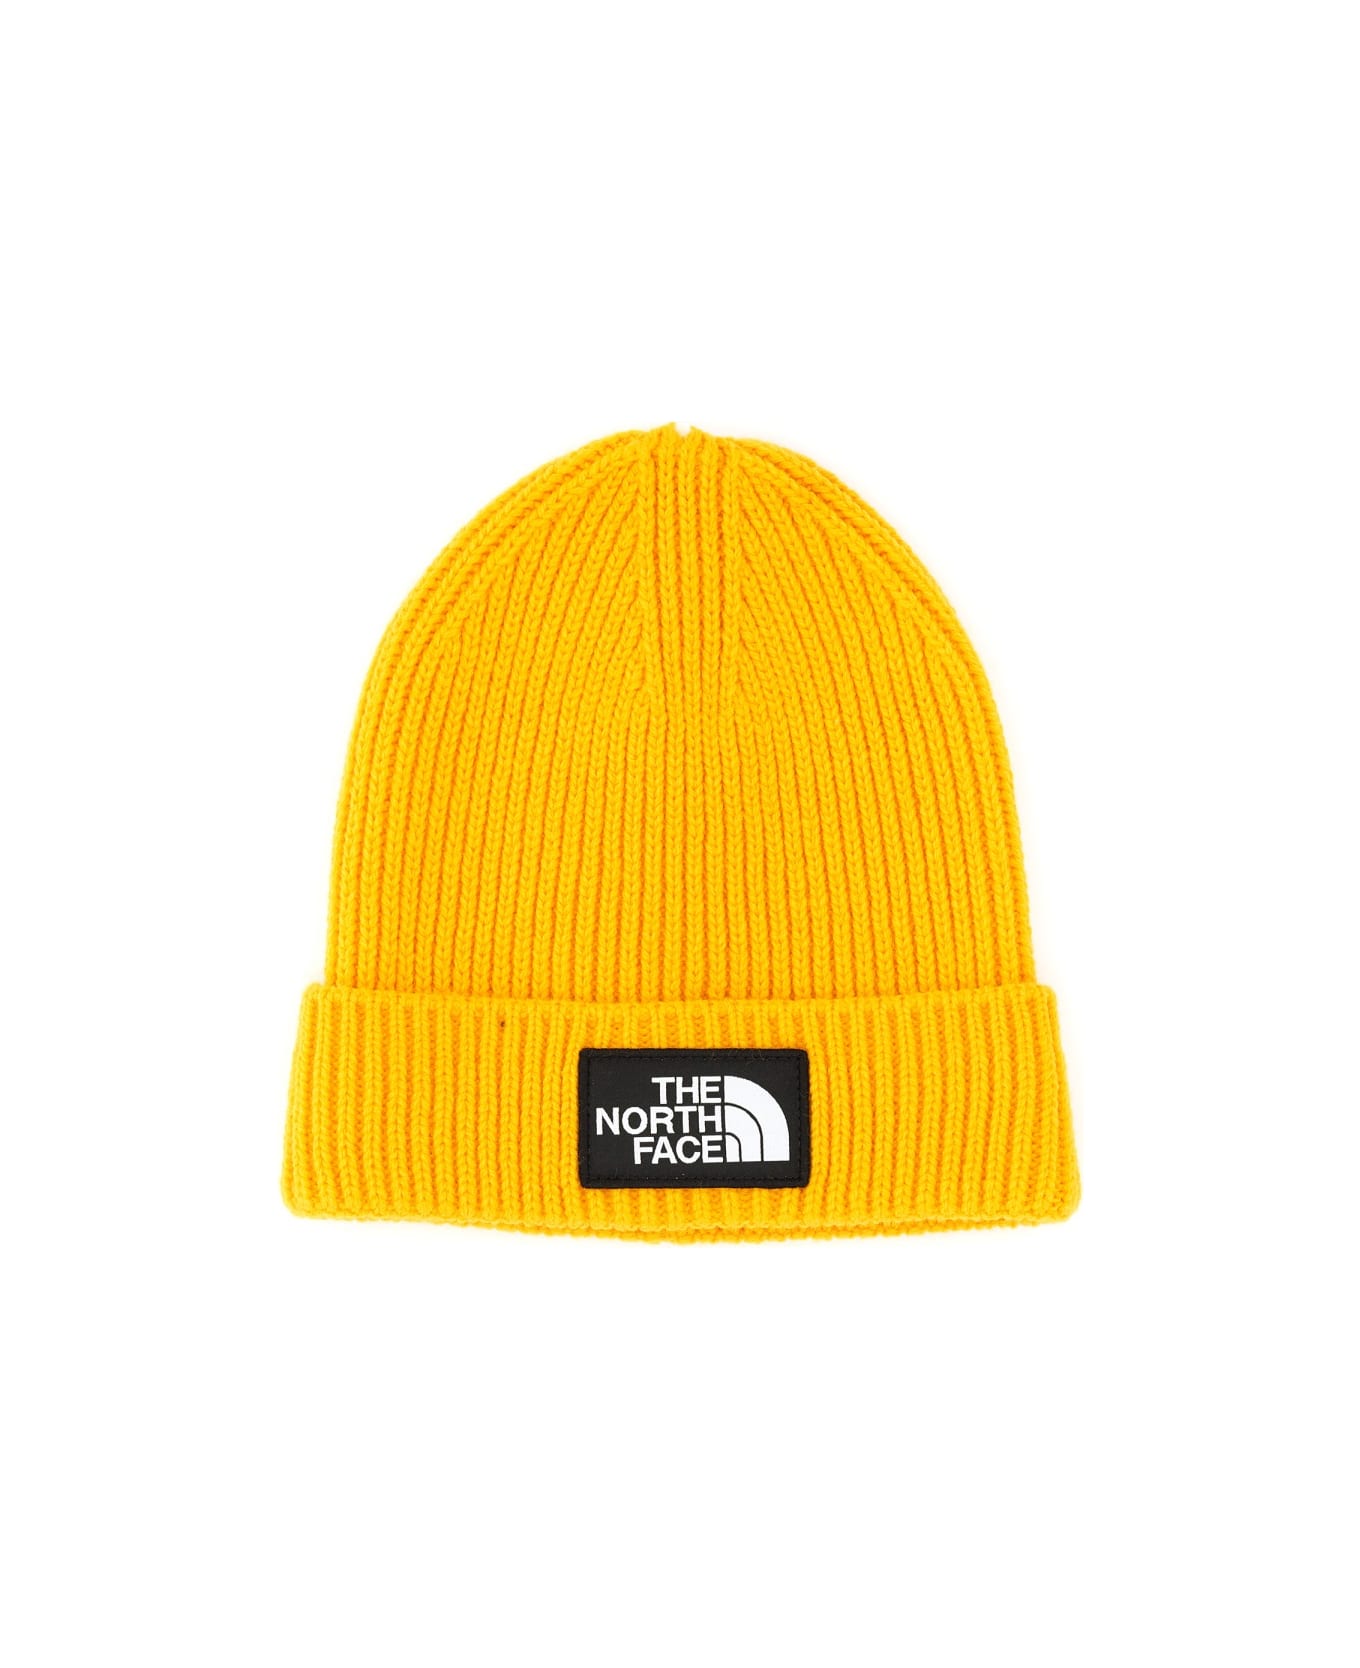 The North Face Beanie Hat - YELLOW 帽子